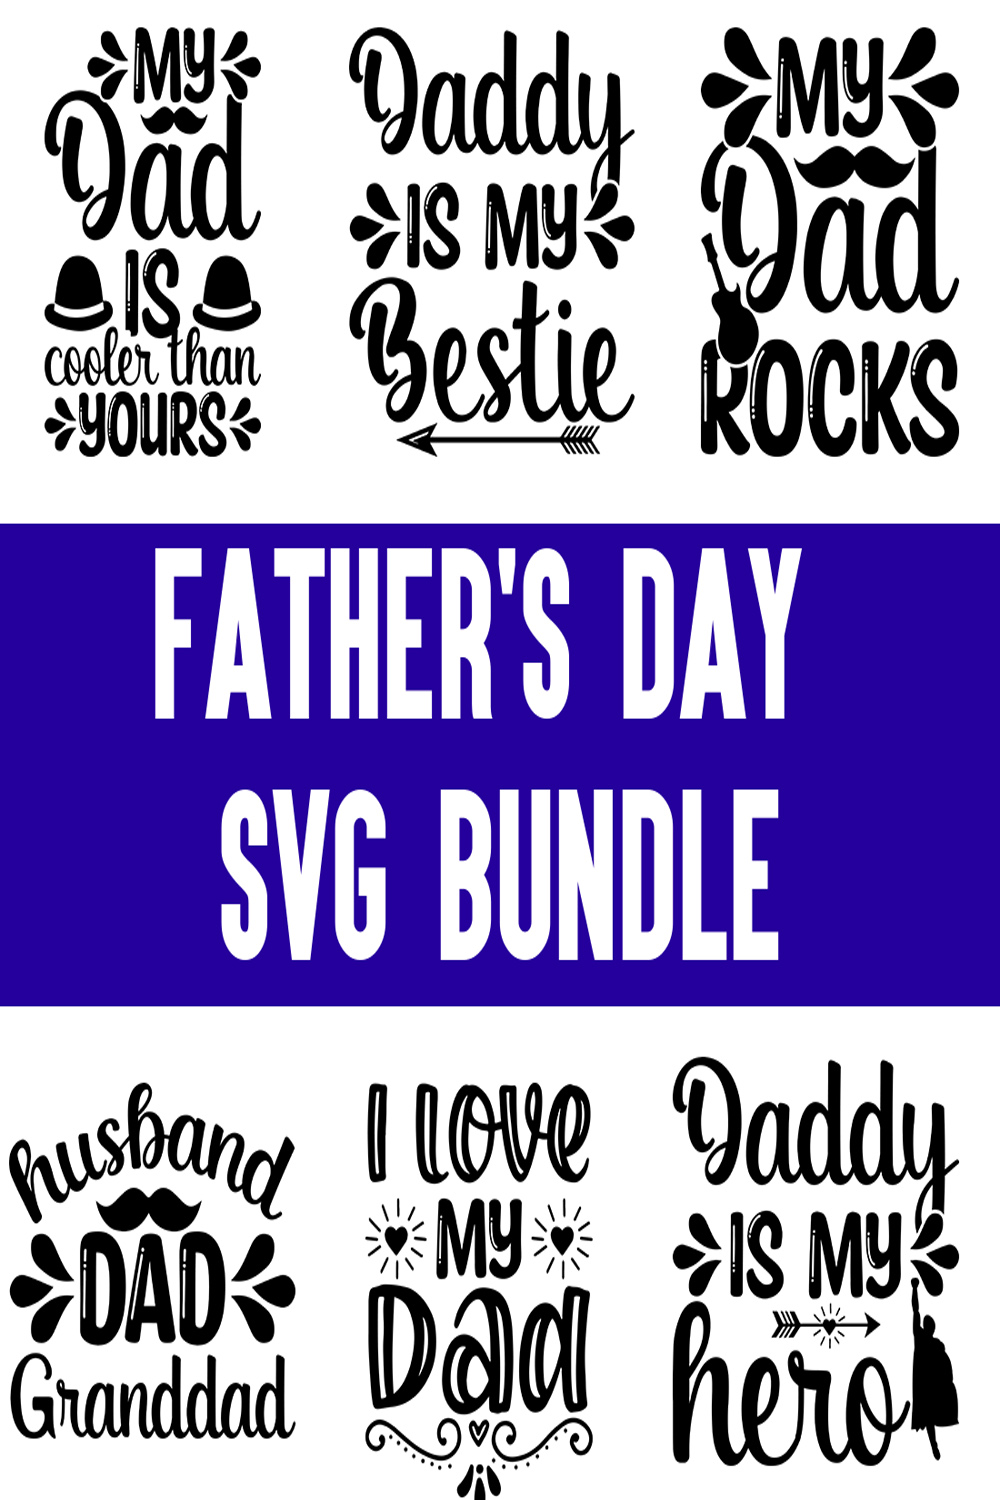 Father's Day svg Bundle preview image.